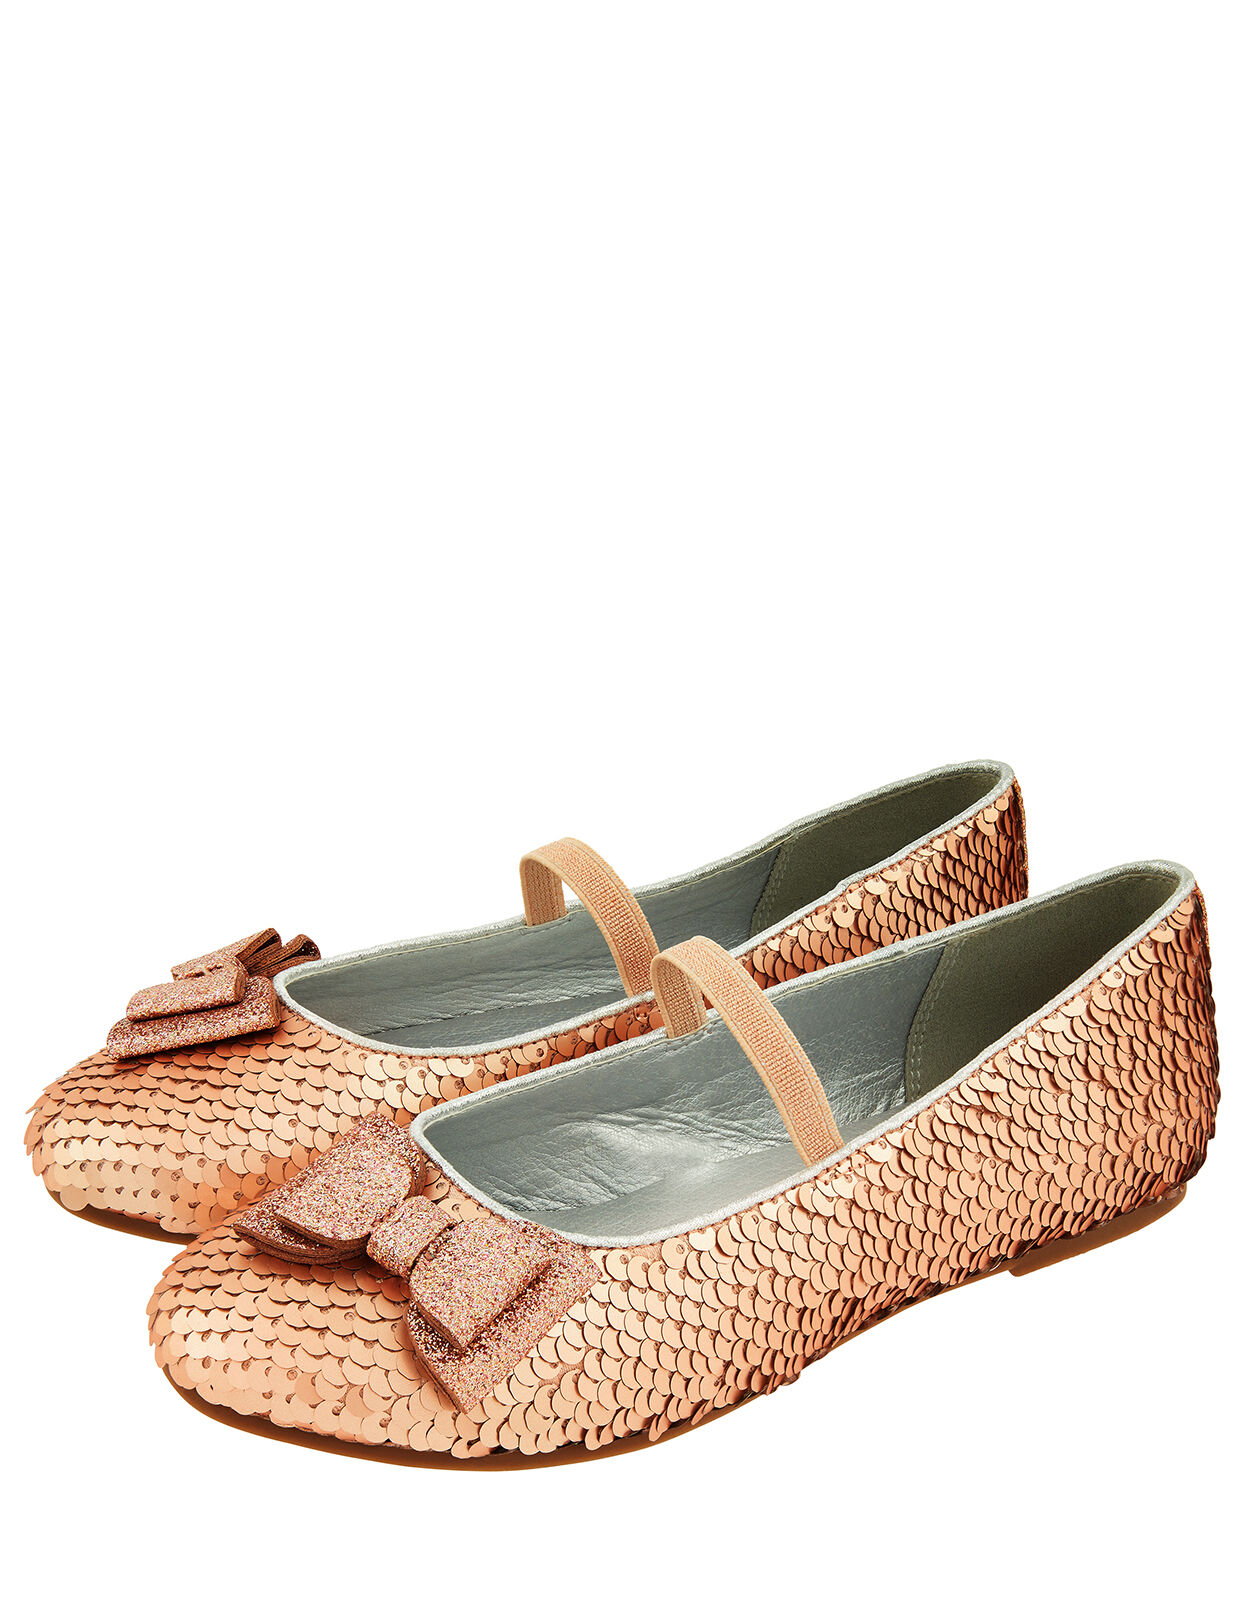 gold ballet shoes for girls